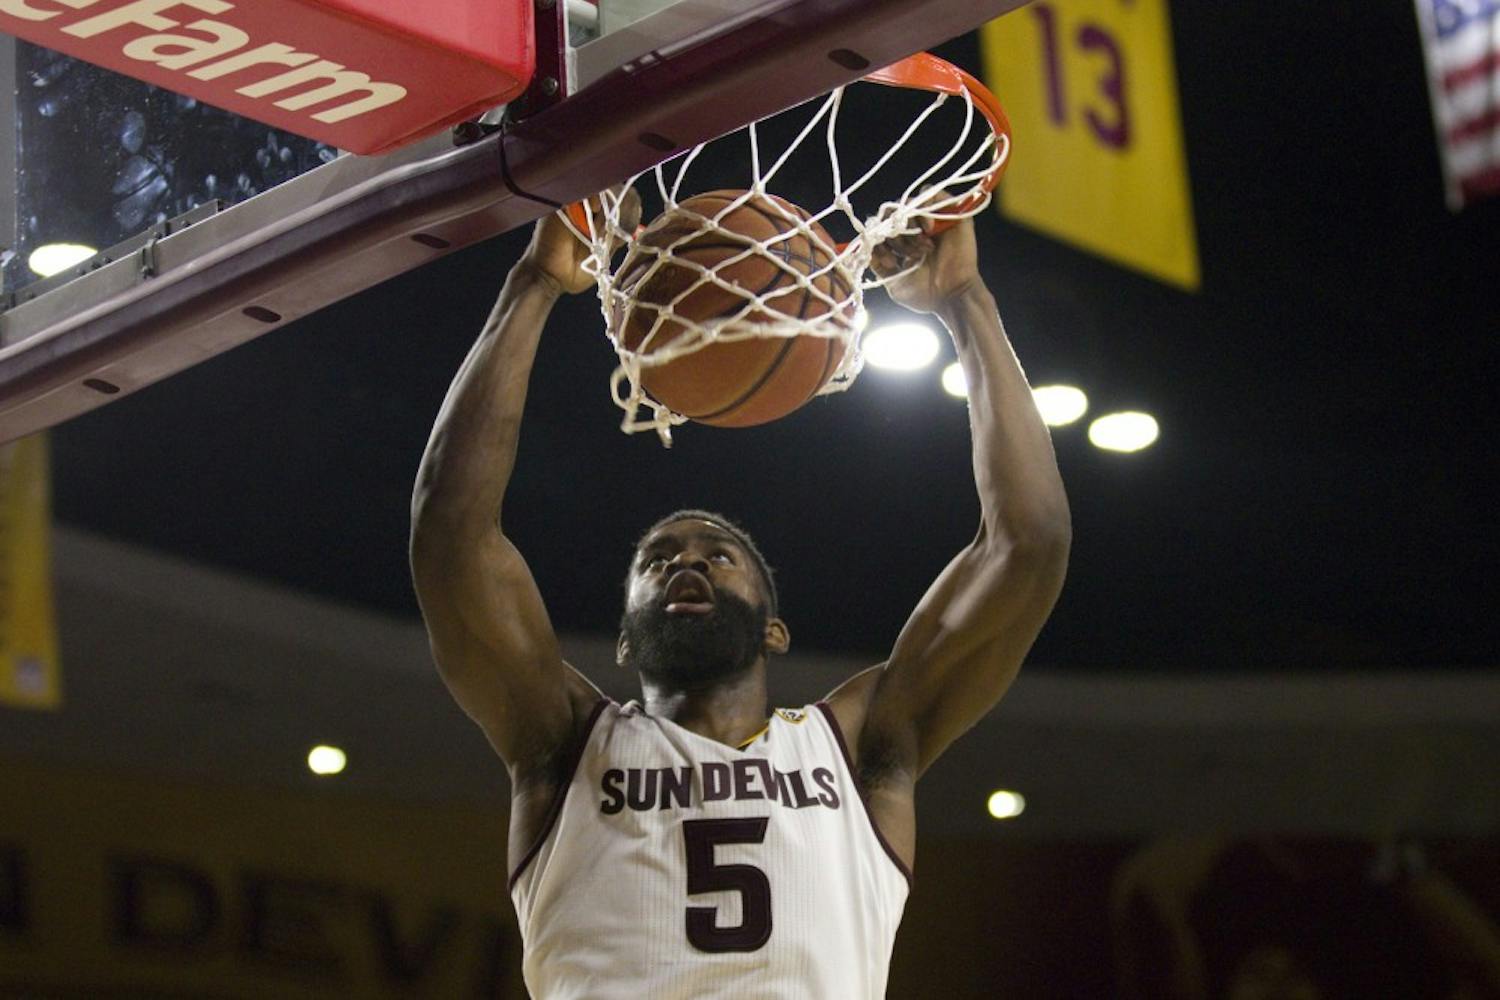 ASU senior forward Obinna Oleka (5) finishes a dunk during a men's basketball game against the University of California Golden Bears in Wells Fargo Arena in Tempe, Arizona, on Wednesday, Feb. 8, 2017. ASU lost the game 68-43. (Josh Orcutt/State Press)